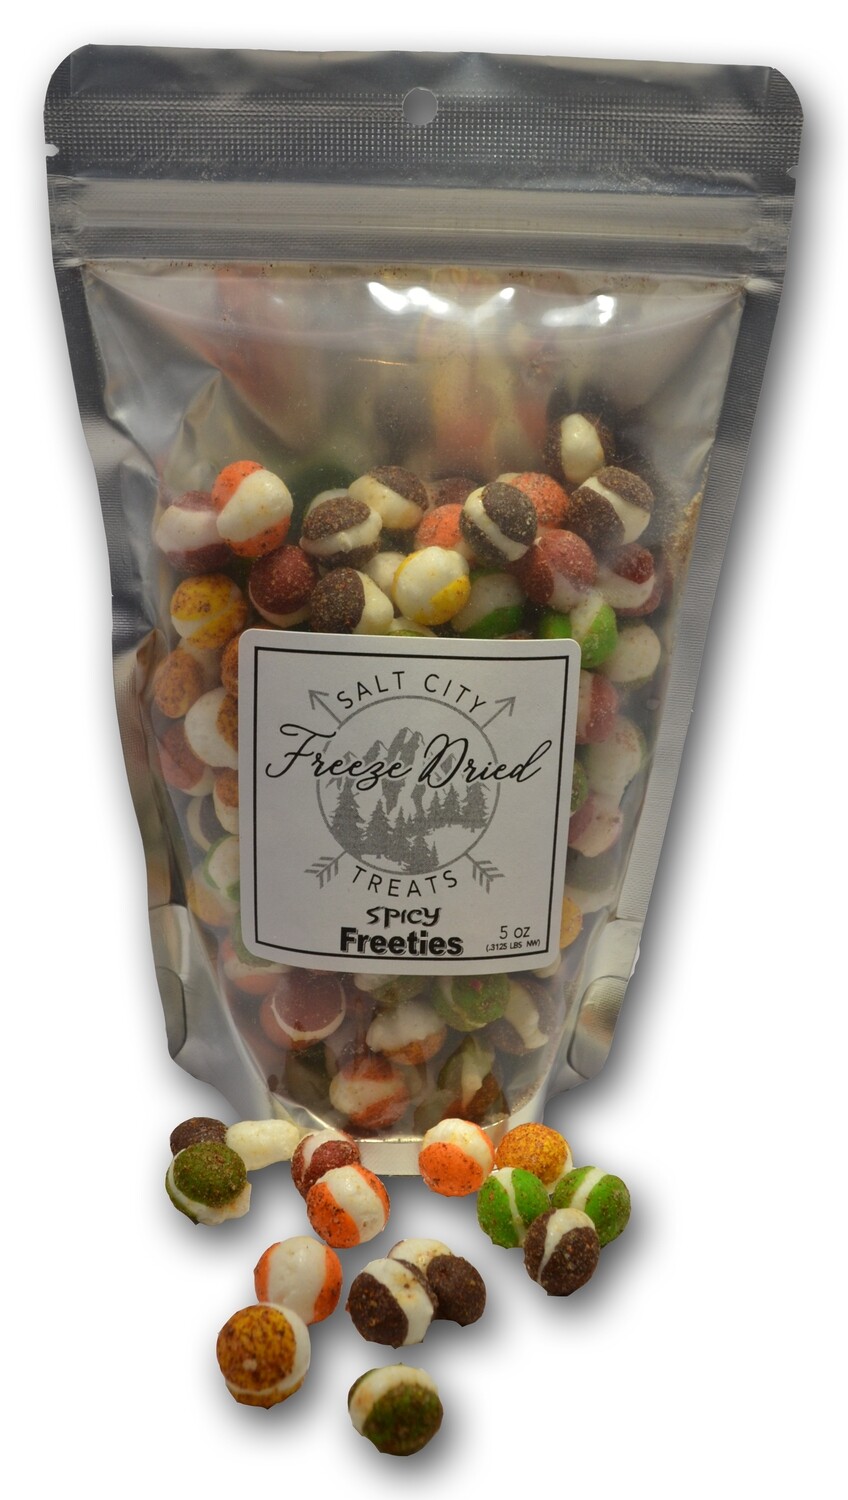 Case of 70 5oz bags Spicy Freeties